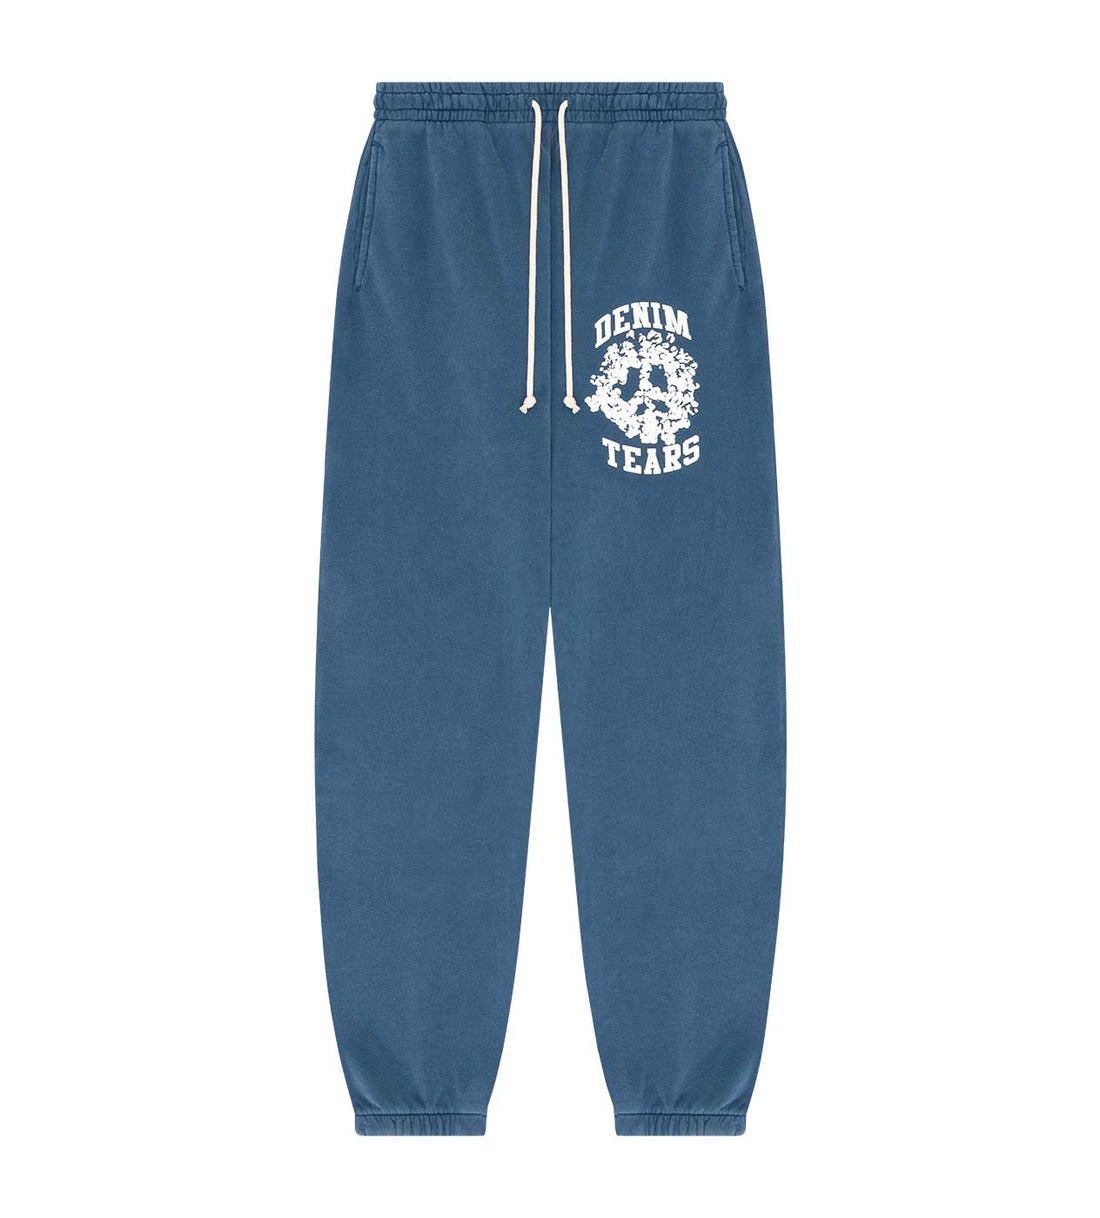 Product Image Of Denim Tears University Navy Sweatpants Front View